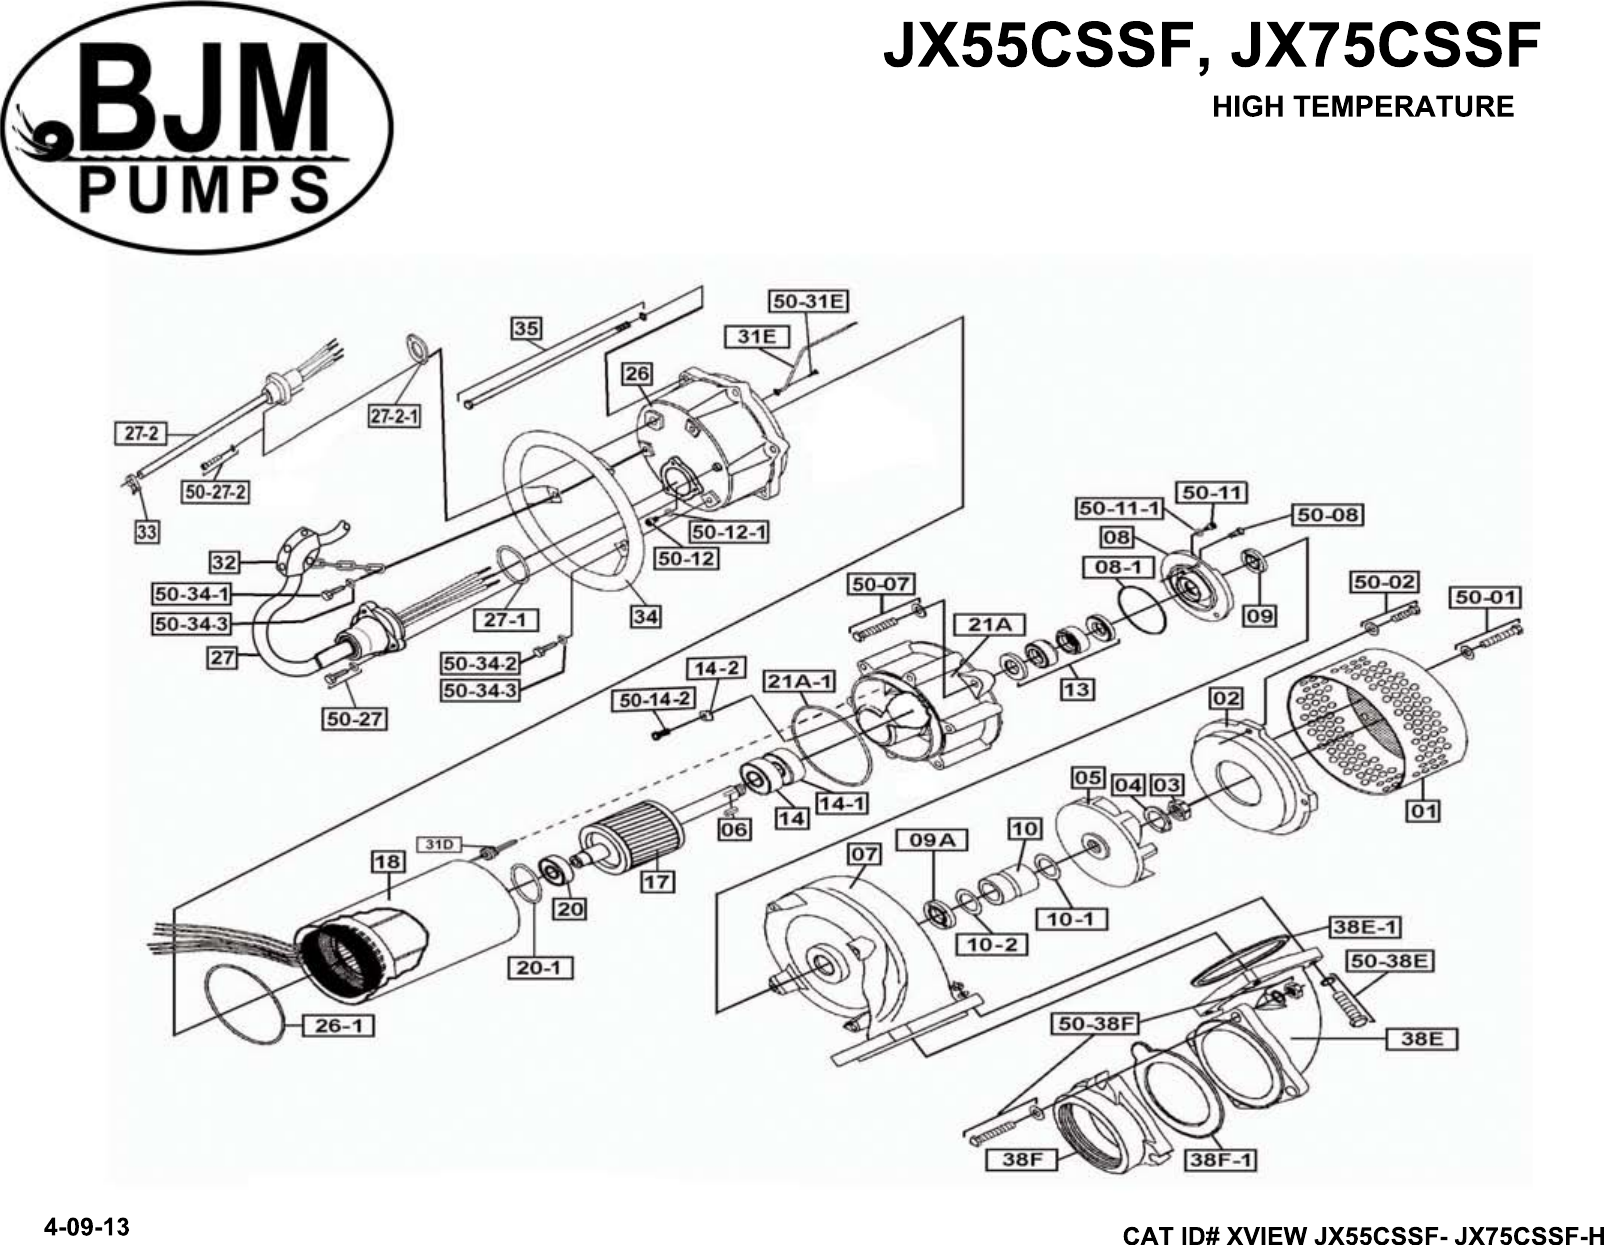 Page 5 of 5 - 136284 6 Bjm Jxf Series Exploded View User Manual